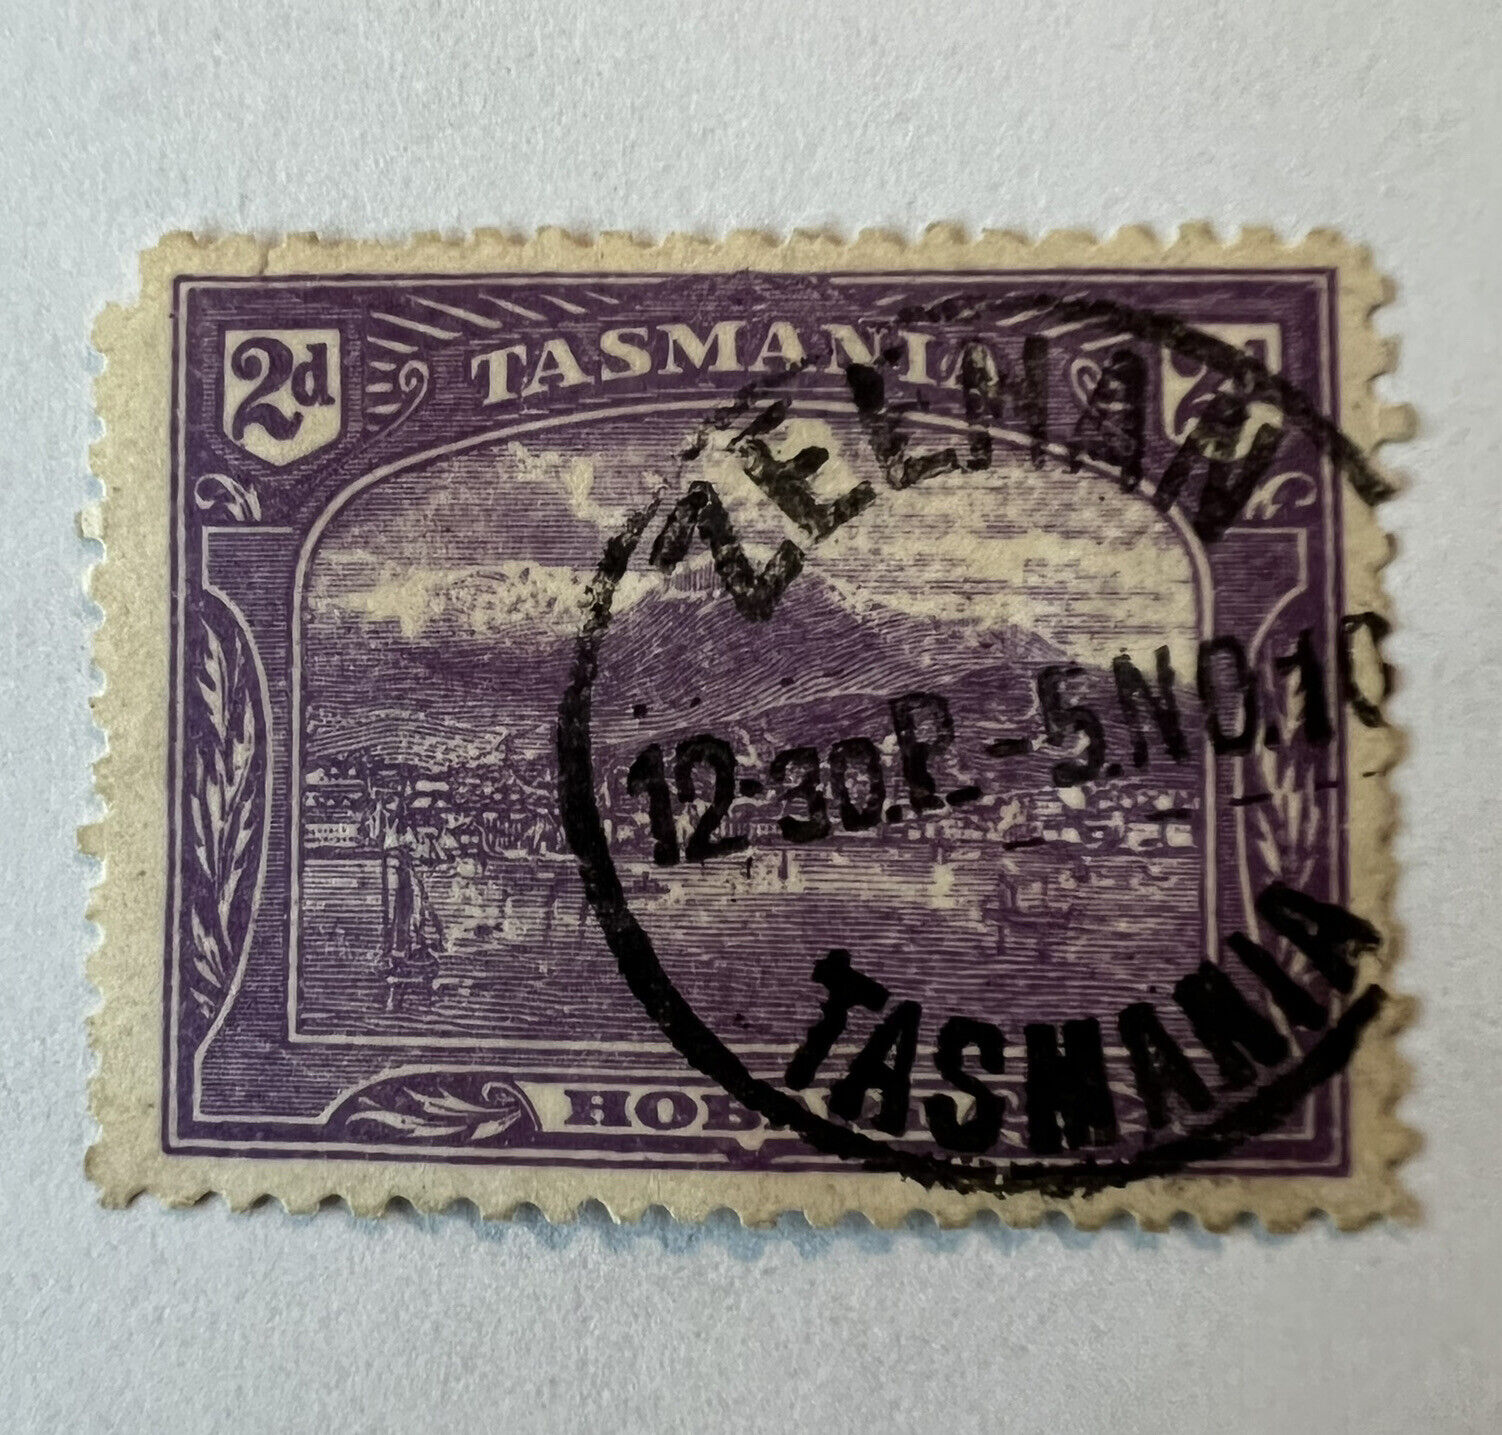 Early Tasmania 2d Stamp With Zeehan Son Sotn Cancel (population 698)